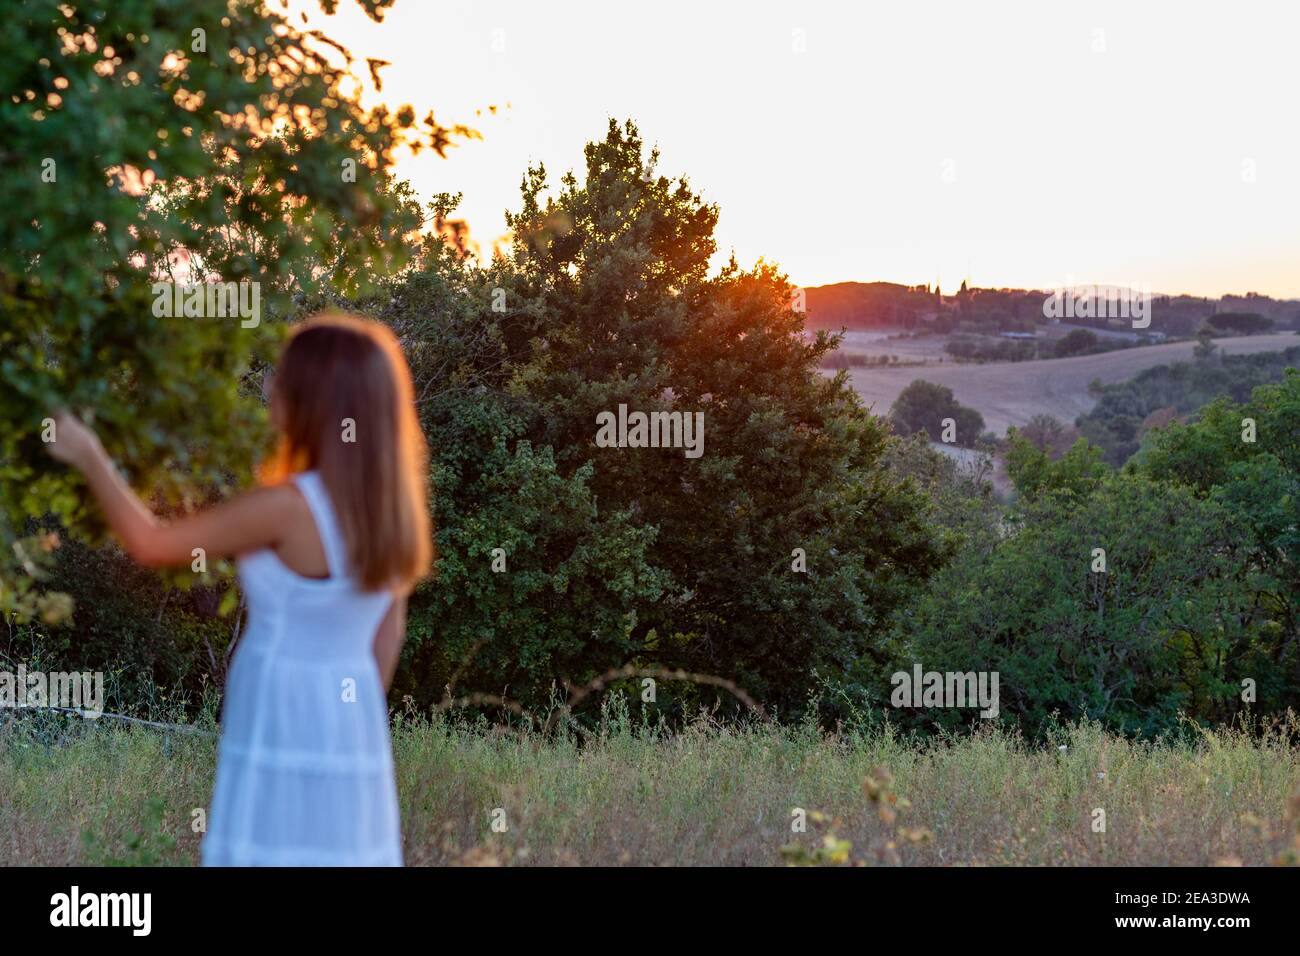 Blurred sunset profile of a young girl with long blonde hair dressed in white as she touches the leaves of the magic tree Stock Photo